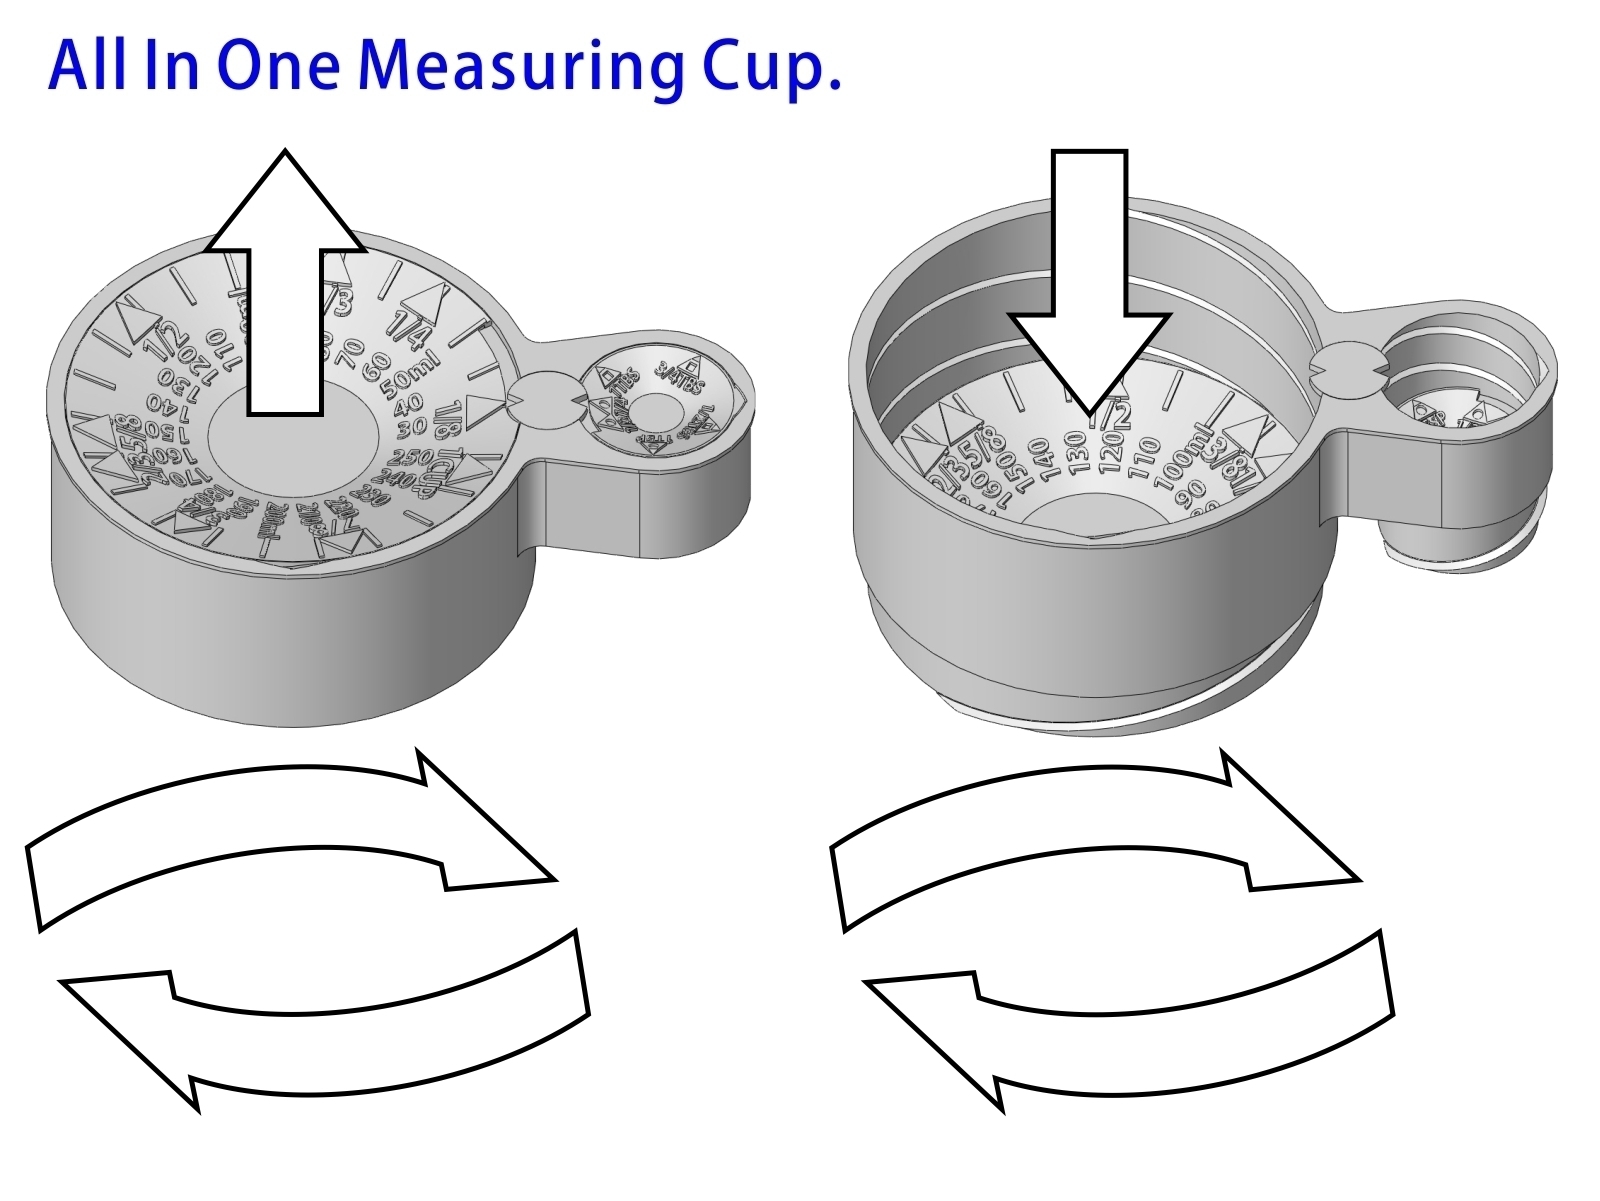 https://assets.pinshape.com/uploads/image/file/263115/all-in-one-measuring-cup-3d-printing-263115.jpg